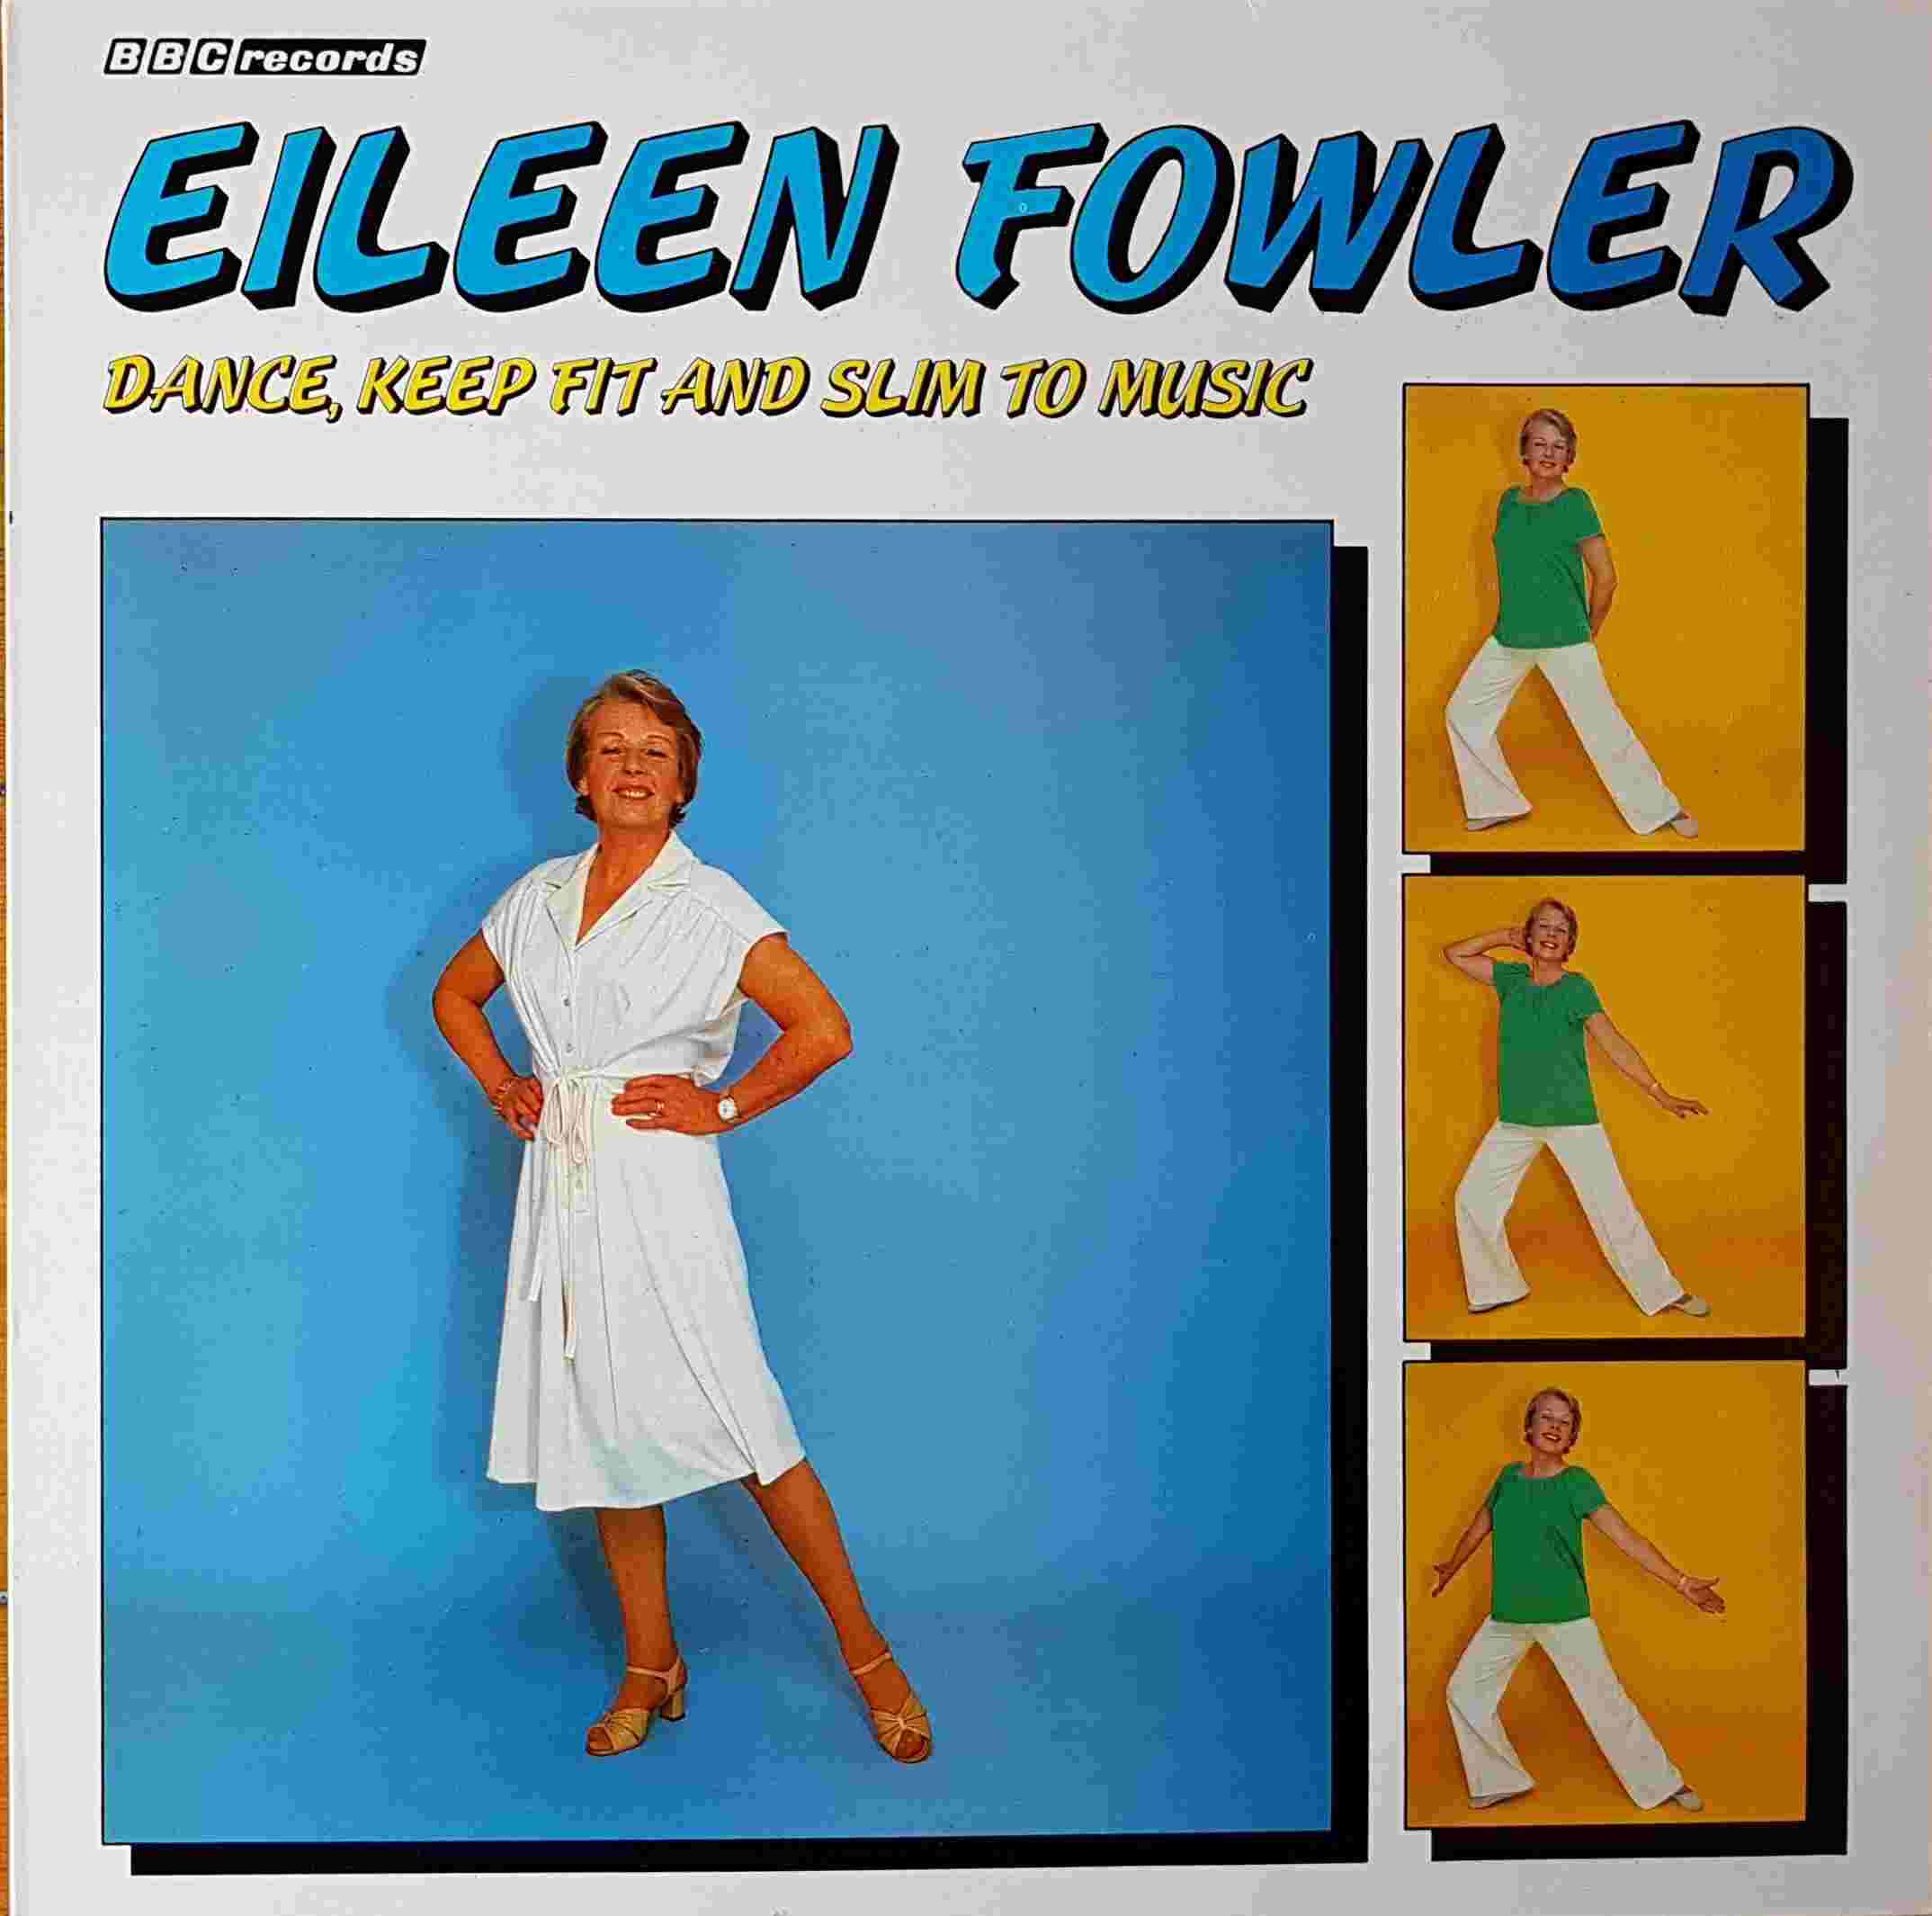 Picture of REC 382 Dance, keep fit and slim to music by artist Various / Eileen Fowler from the BBC records and Tapes library